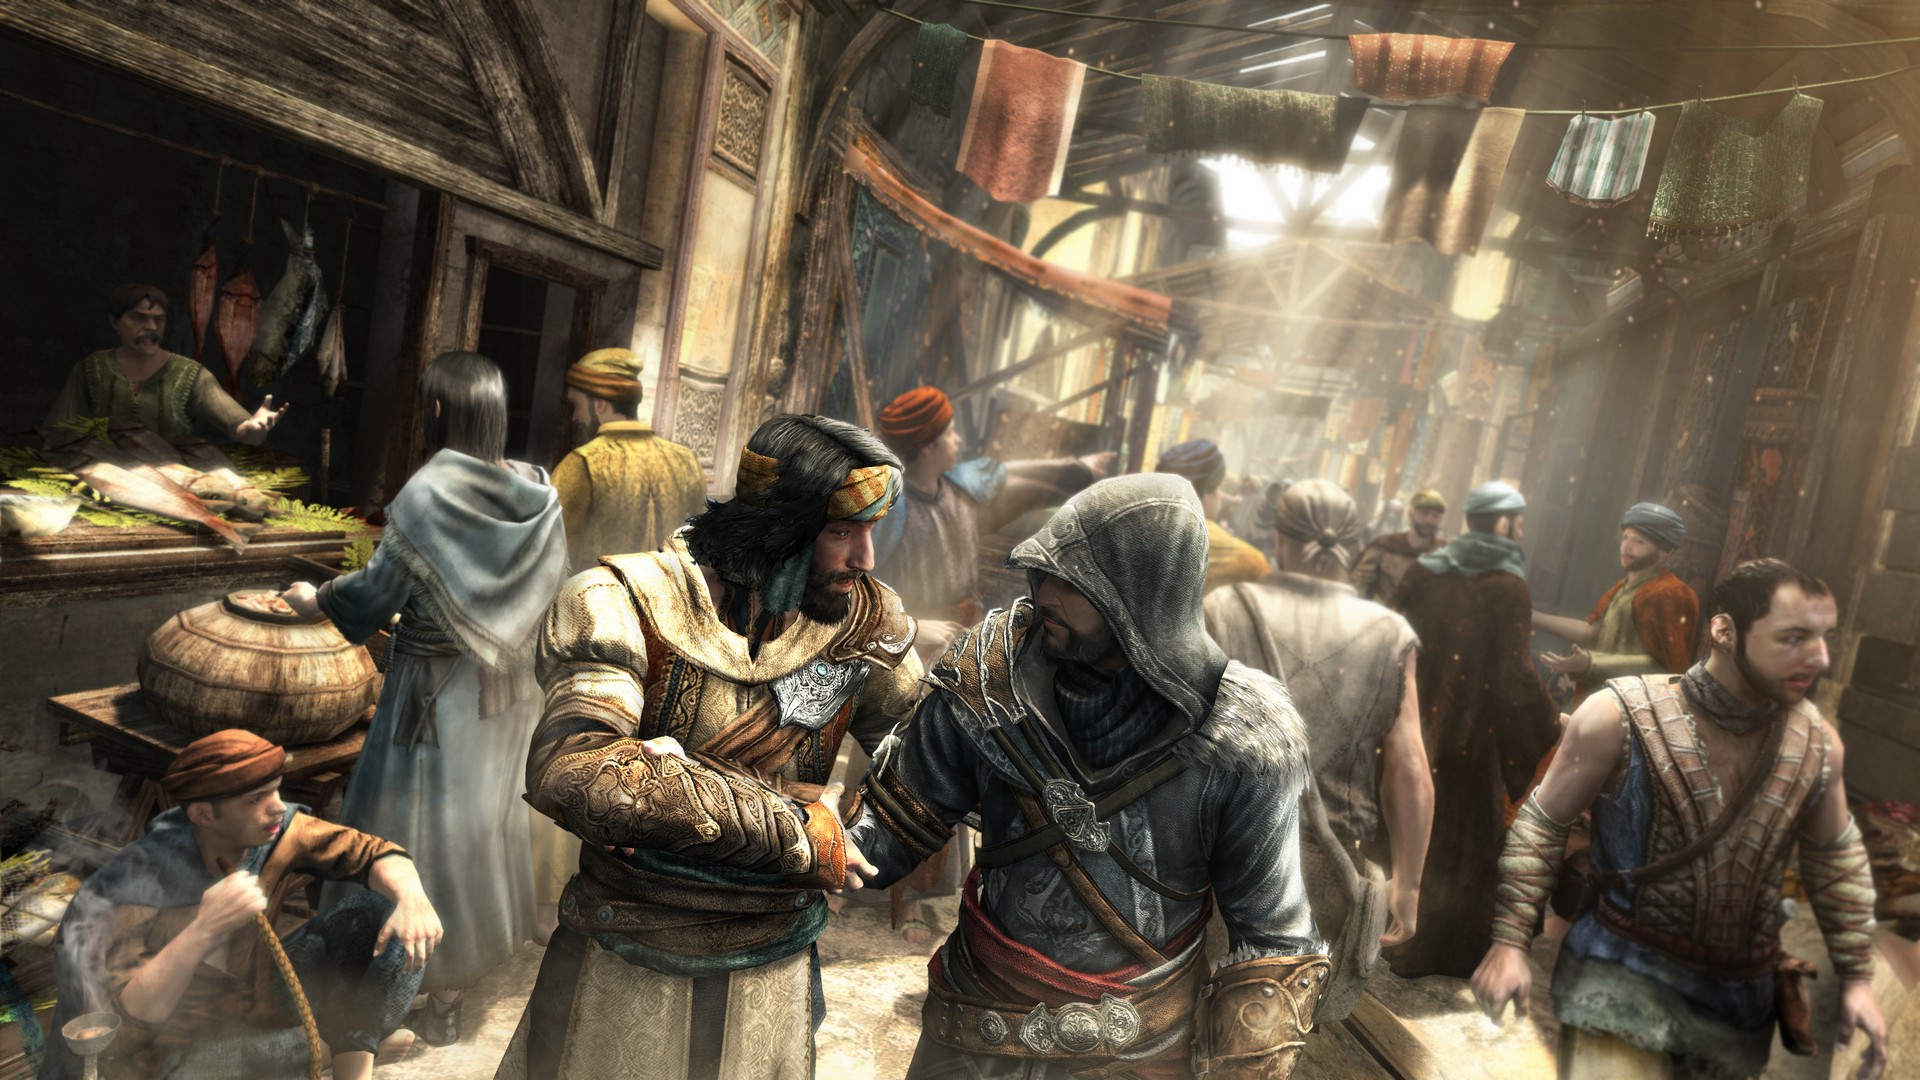 General 1920x1080 video games Assassin's Creed Ezio Auditore da Firenze Assassin's Creed: Revelations PC gaming video game man video game art